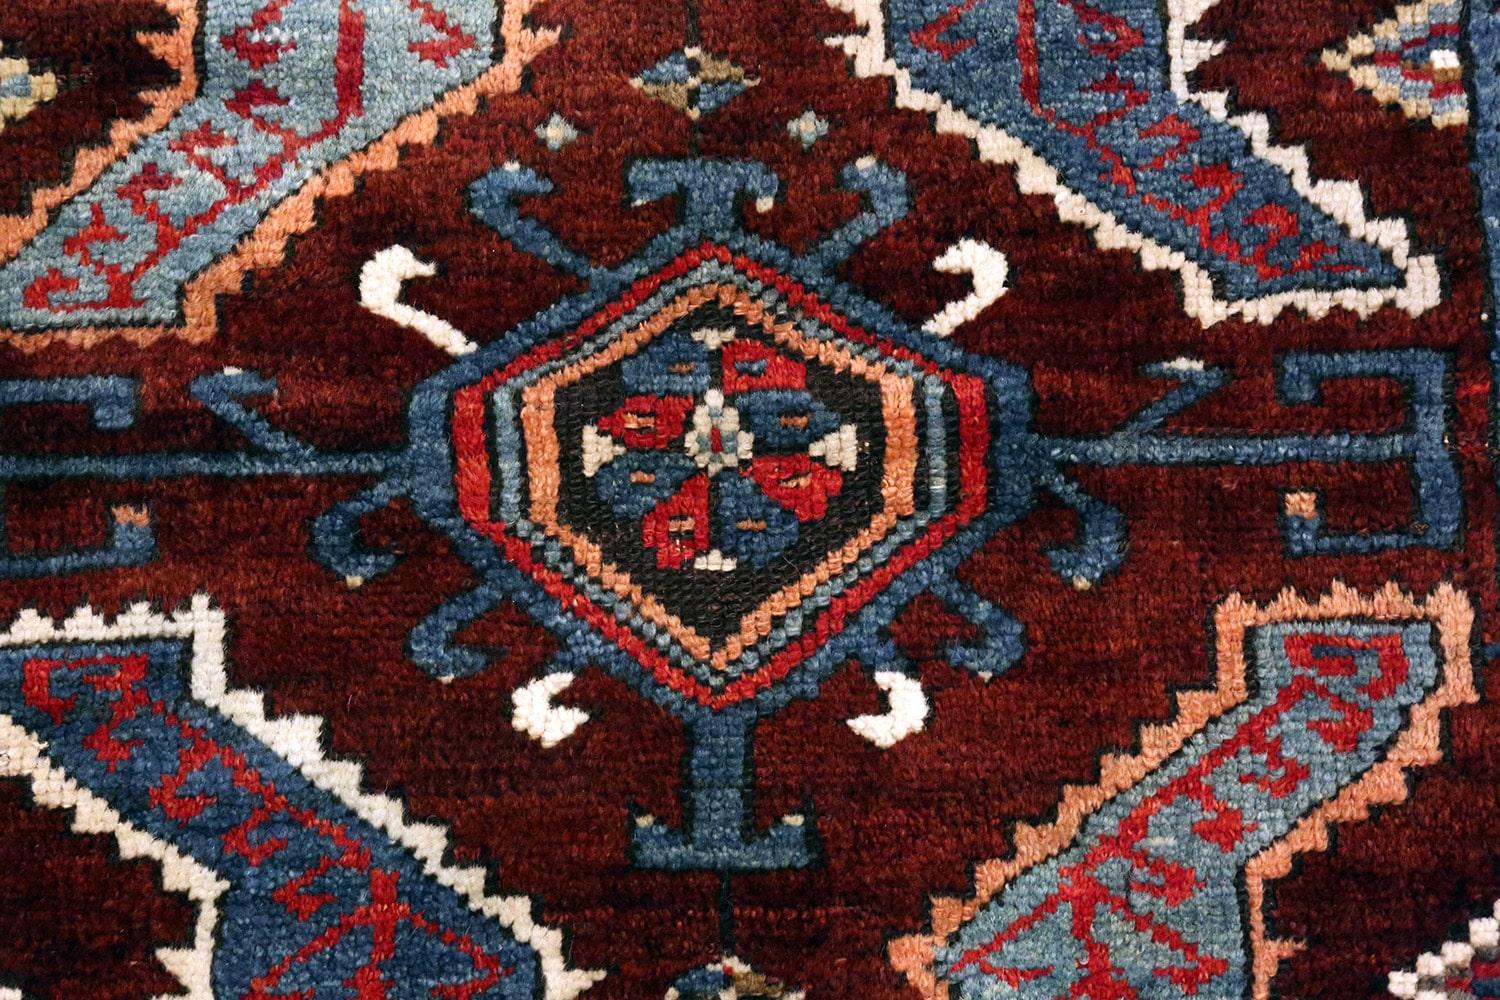 Hand-Knotted Small Antique Turkish Yastic Rug. Size: 2 ft 1 in x 3 ft 3 in (0.63 m x 0.99 m)